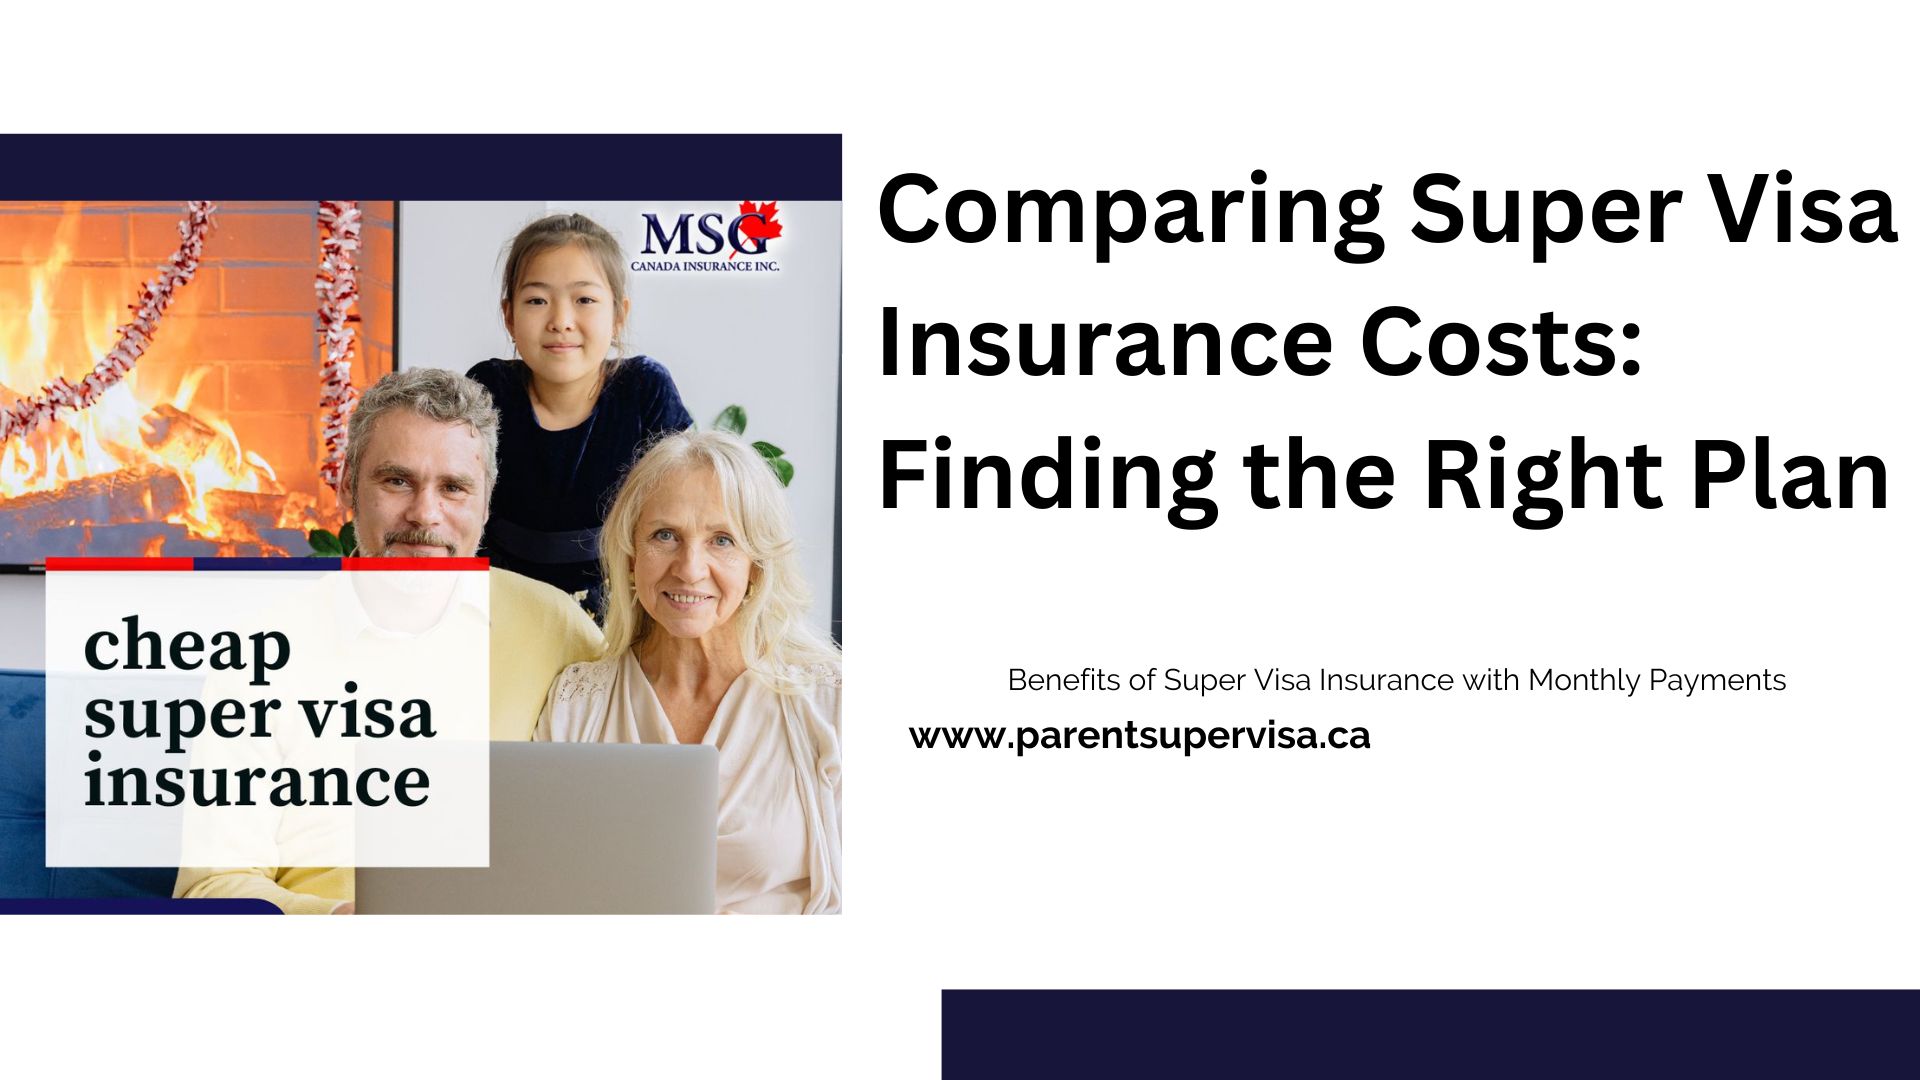 Comparing Super Visa Insurance Costs: Finding the Right Plan